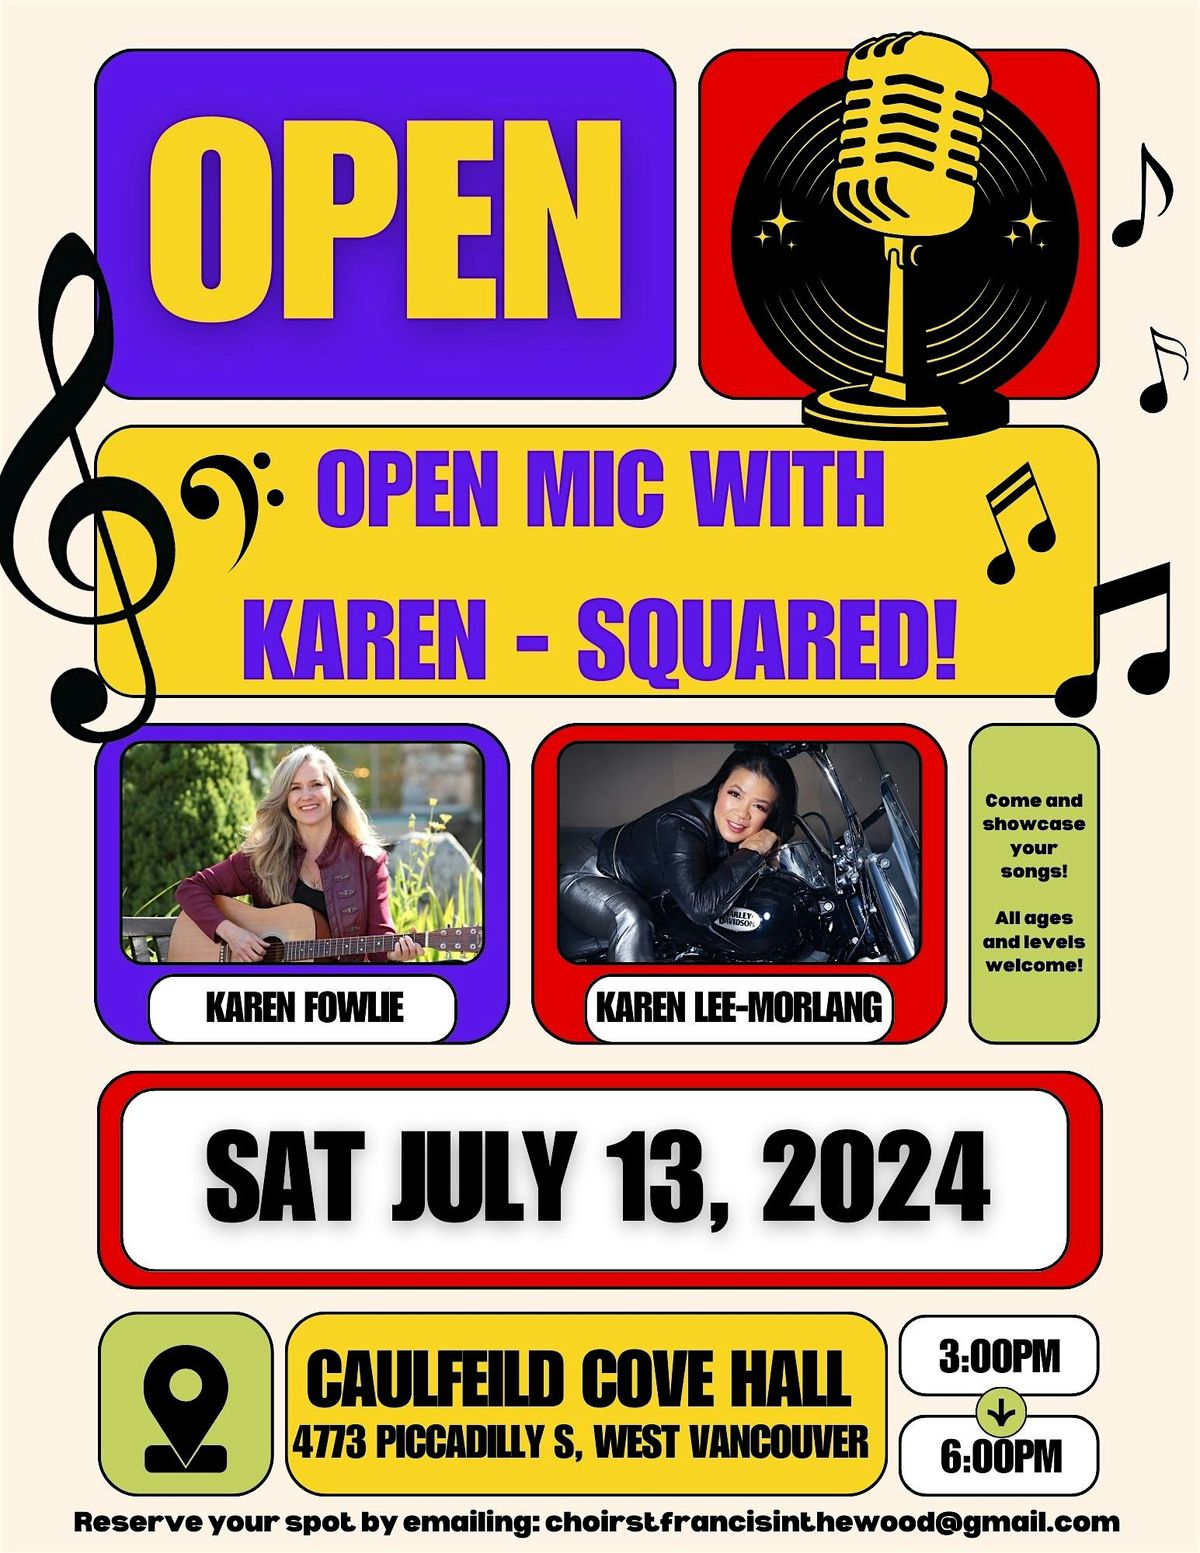 July 13: Open Mic with Karen-squared!